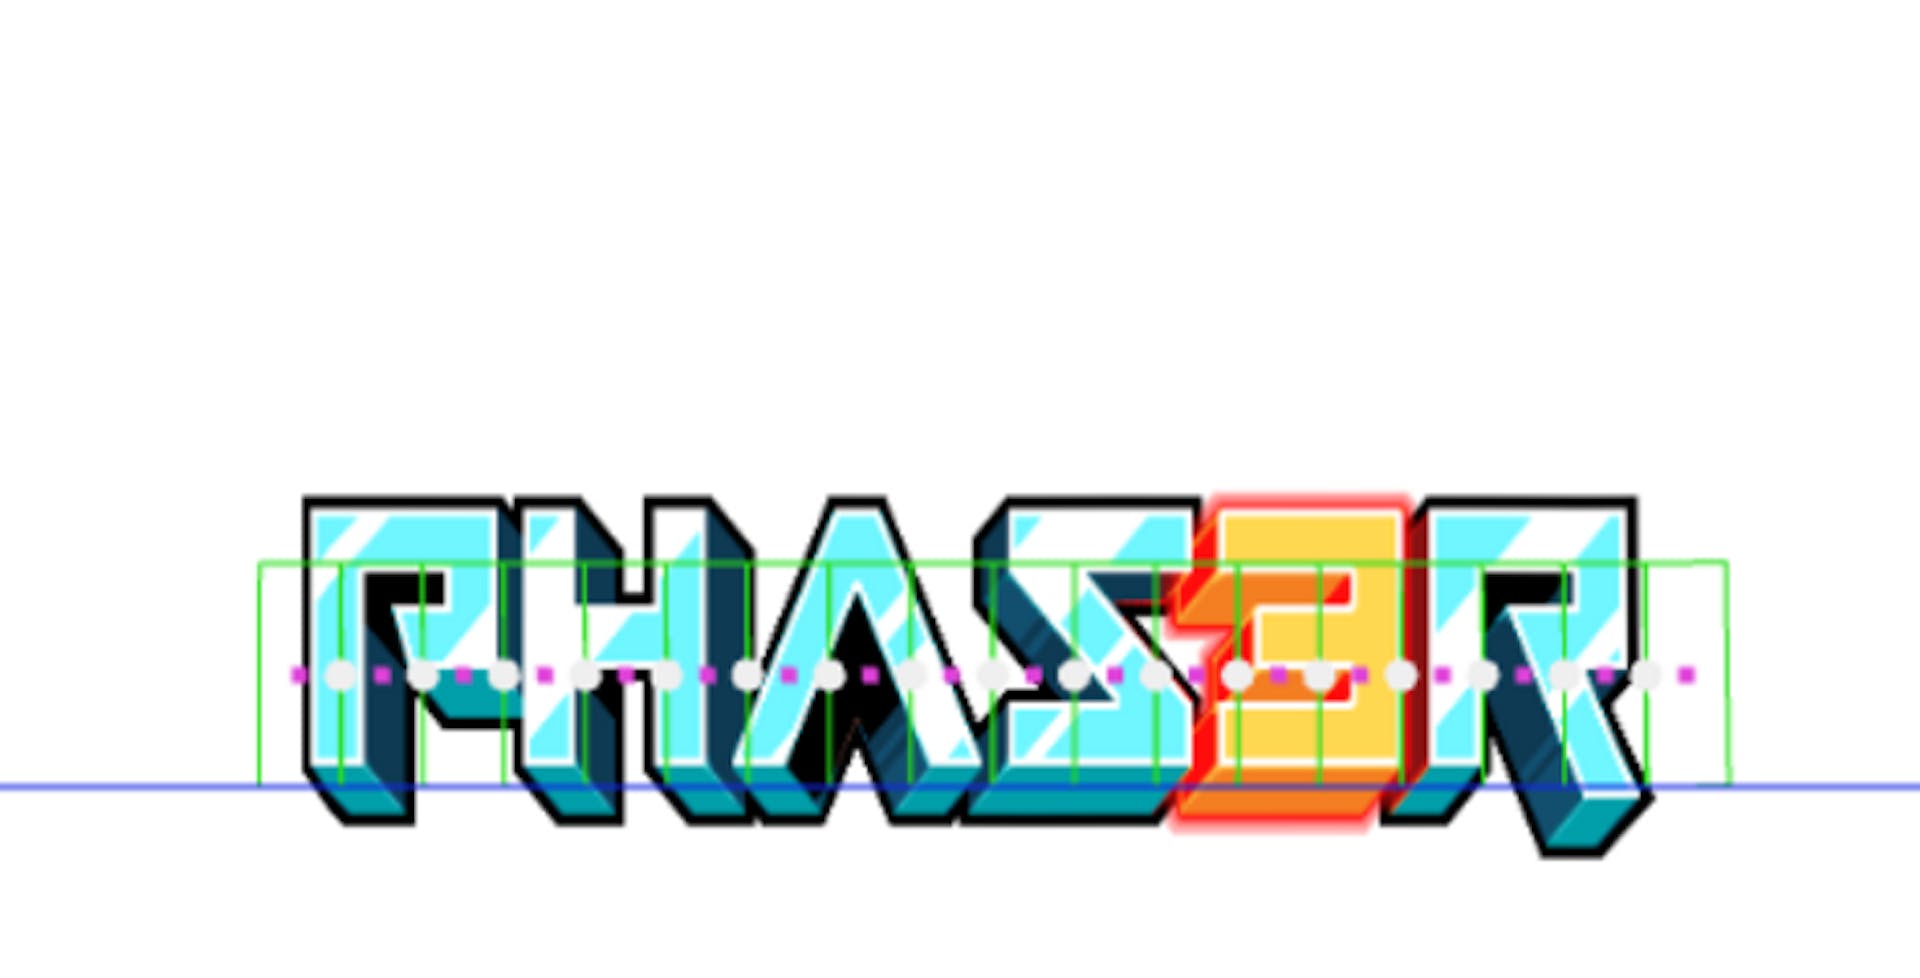 The Phaser logo attached to the physics boxes to create a mesh